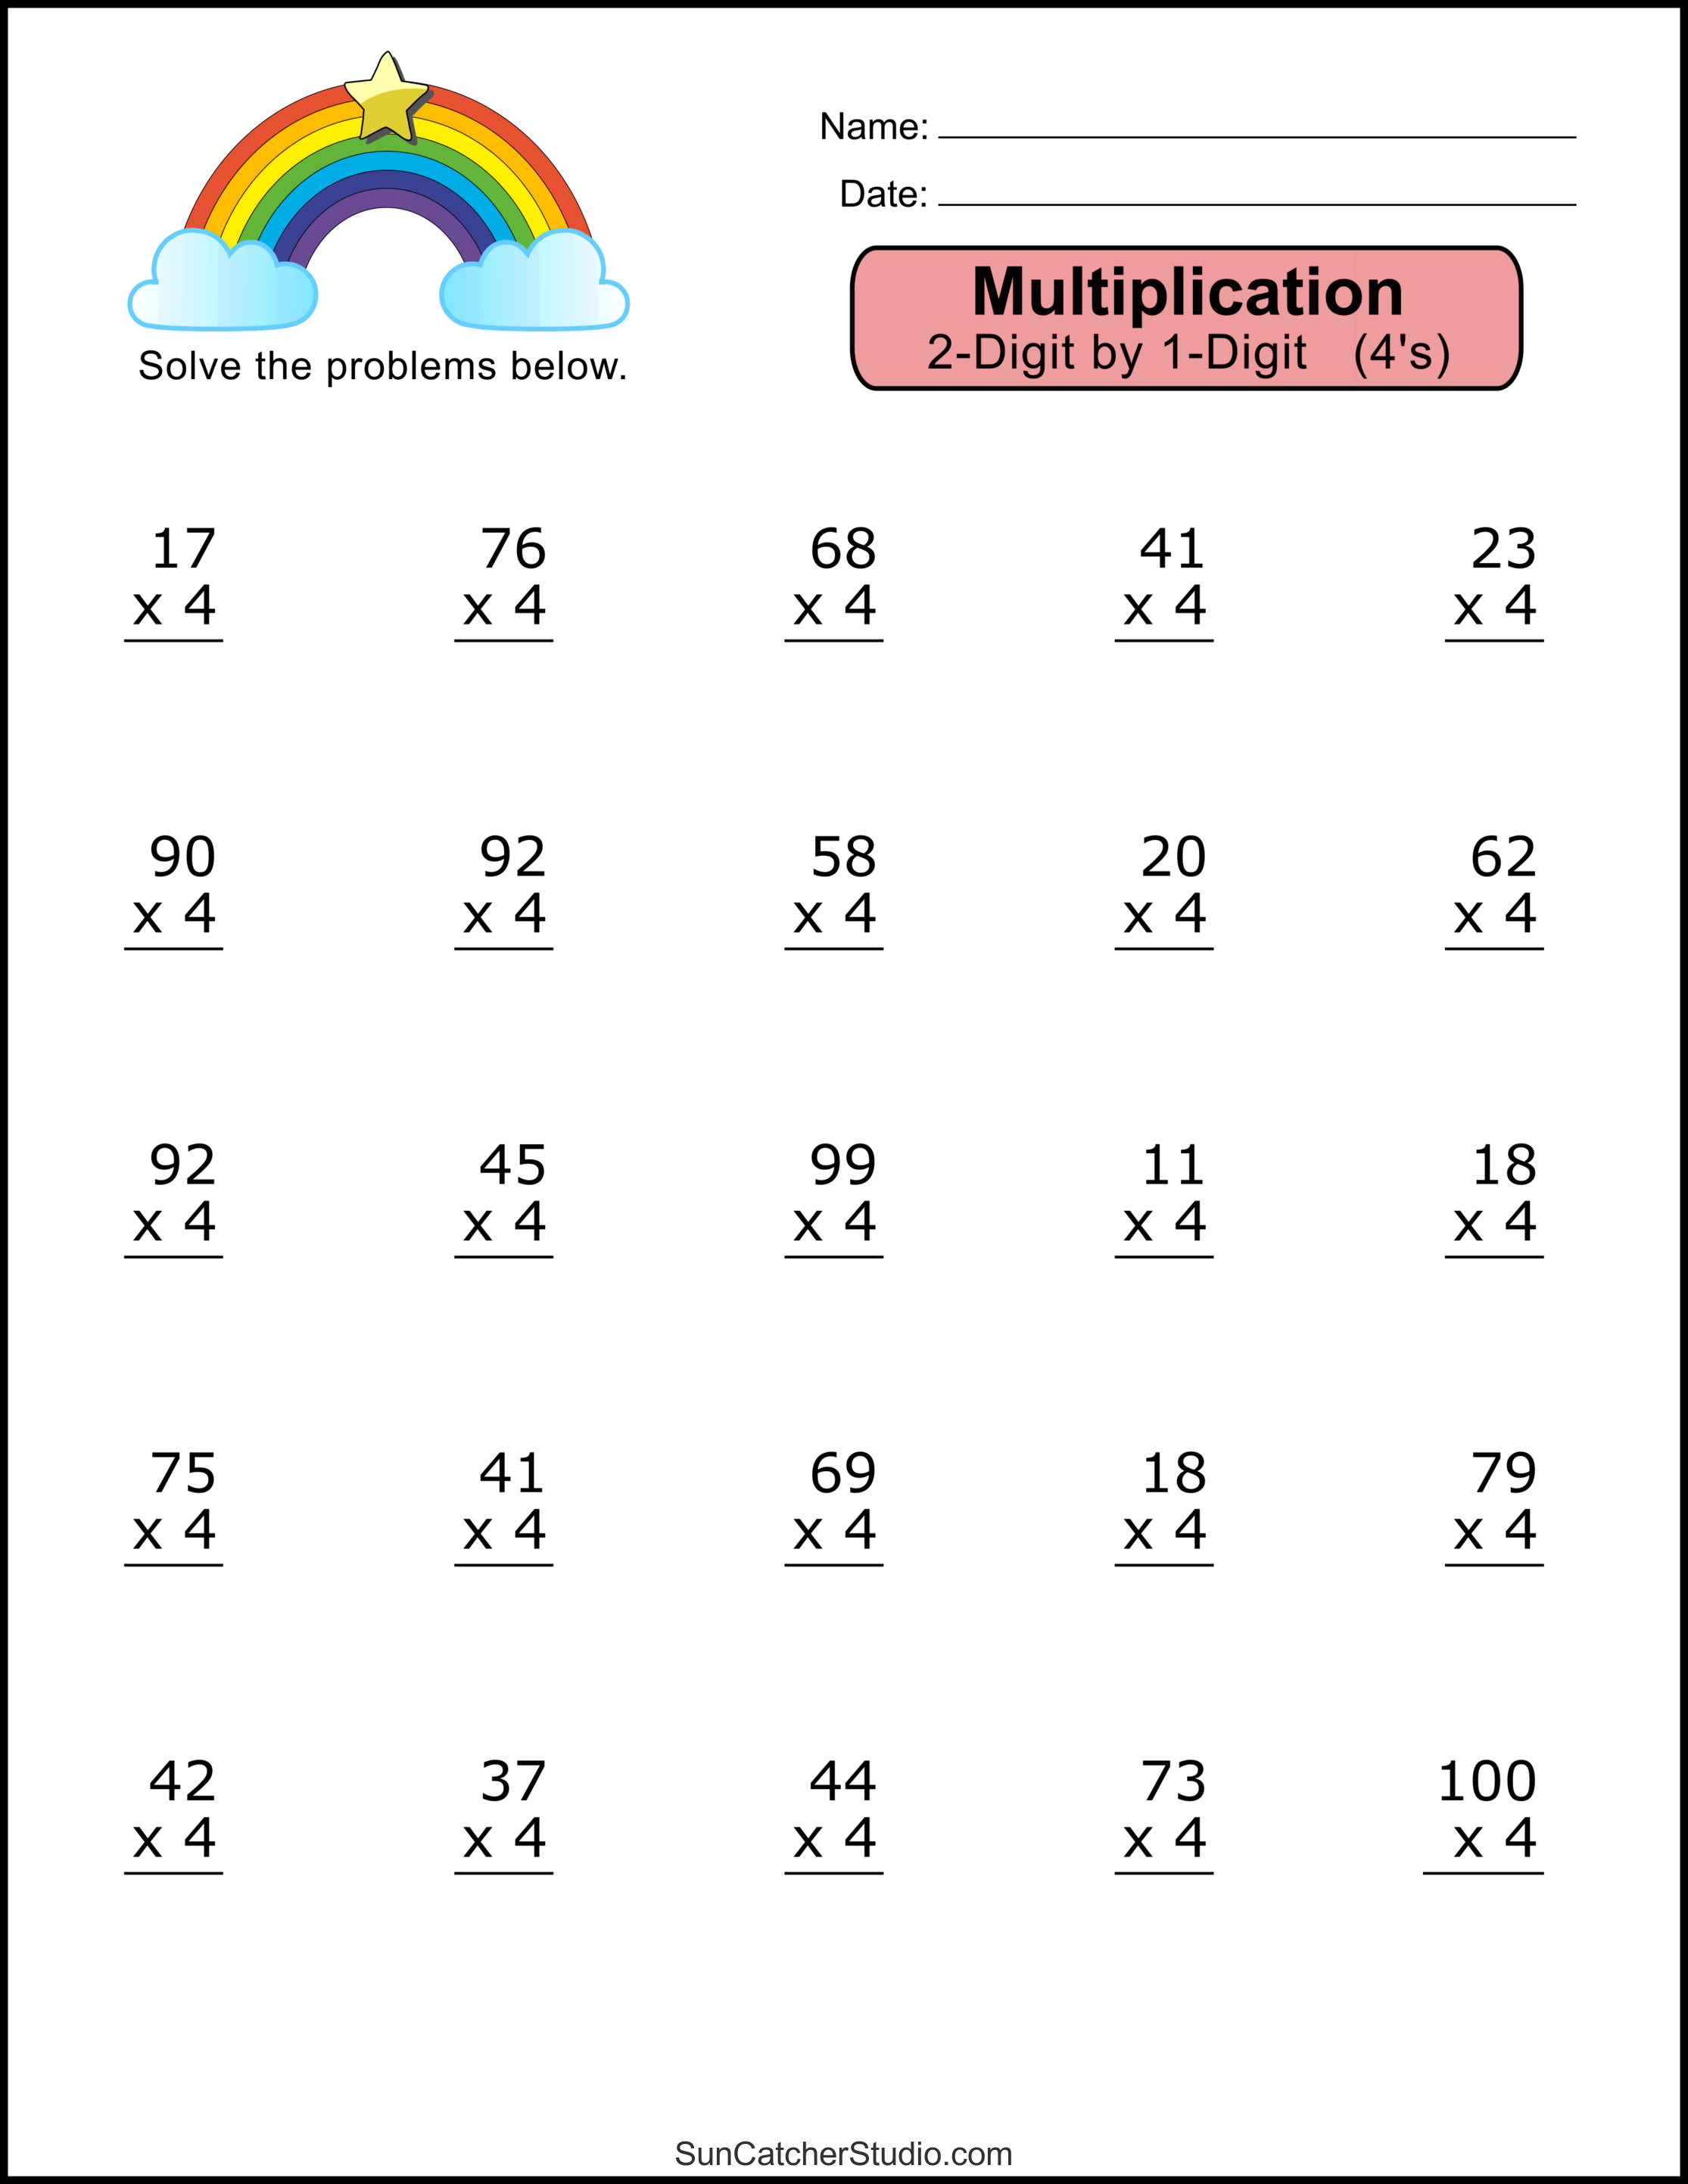 Multiplication Worksheets 2 Digit By 1 Digit Math Drills DIY Projects Patterns Monograms